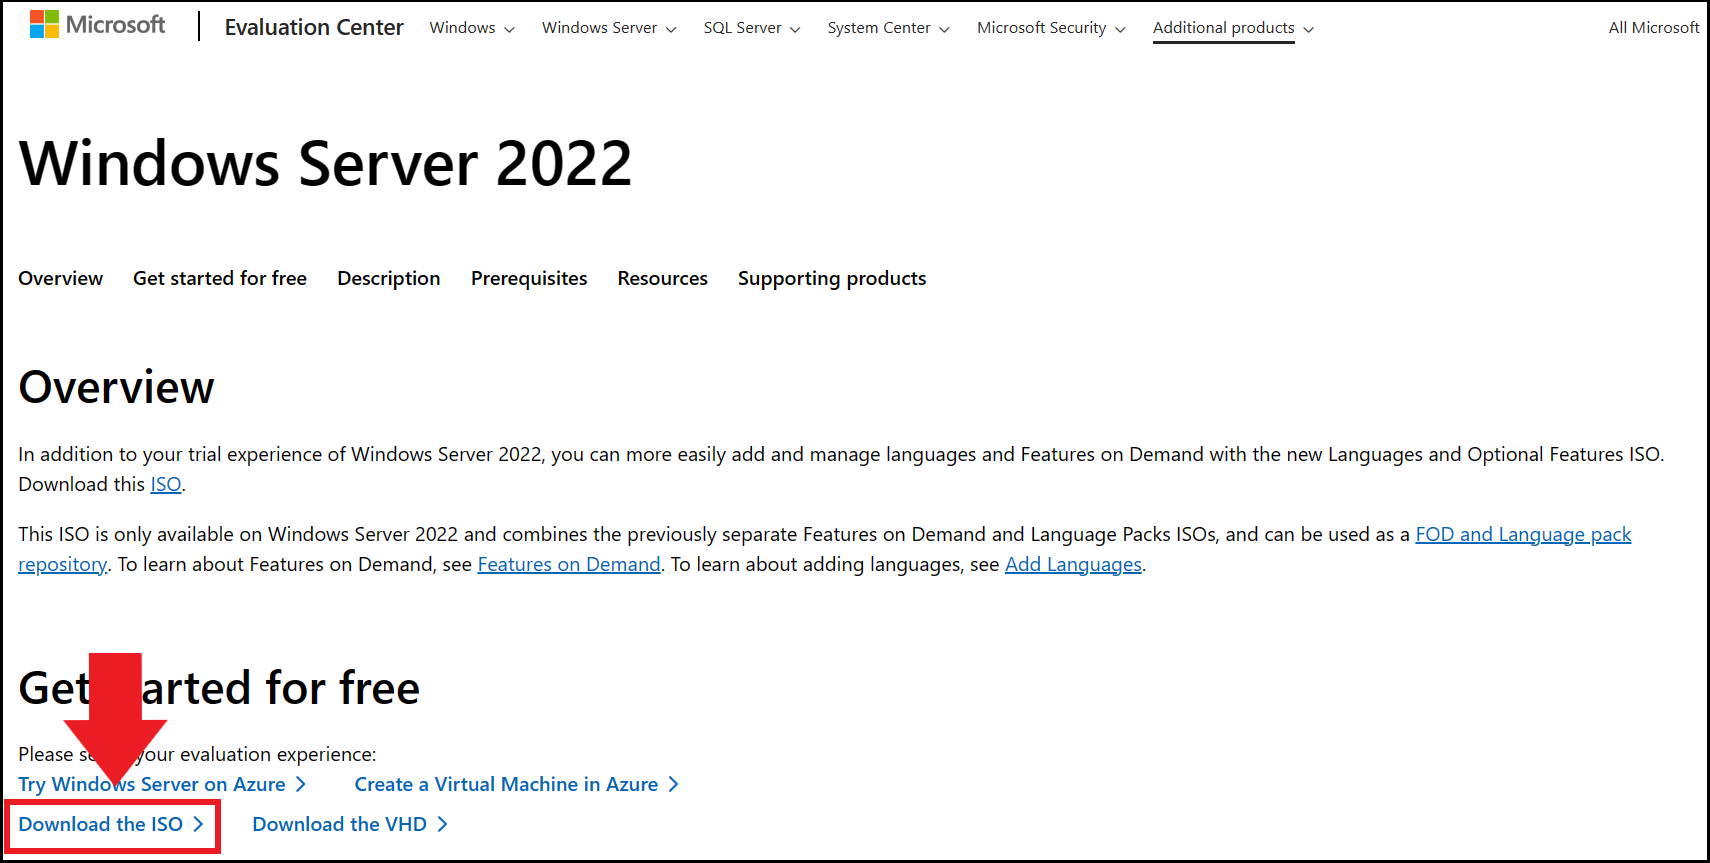 The ISO of Windows Server 2022 in the Microsoft Evaluation Center